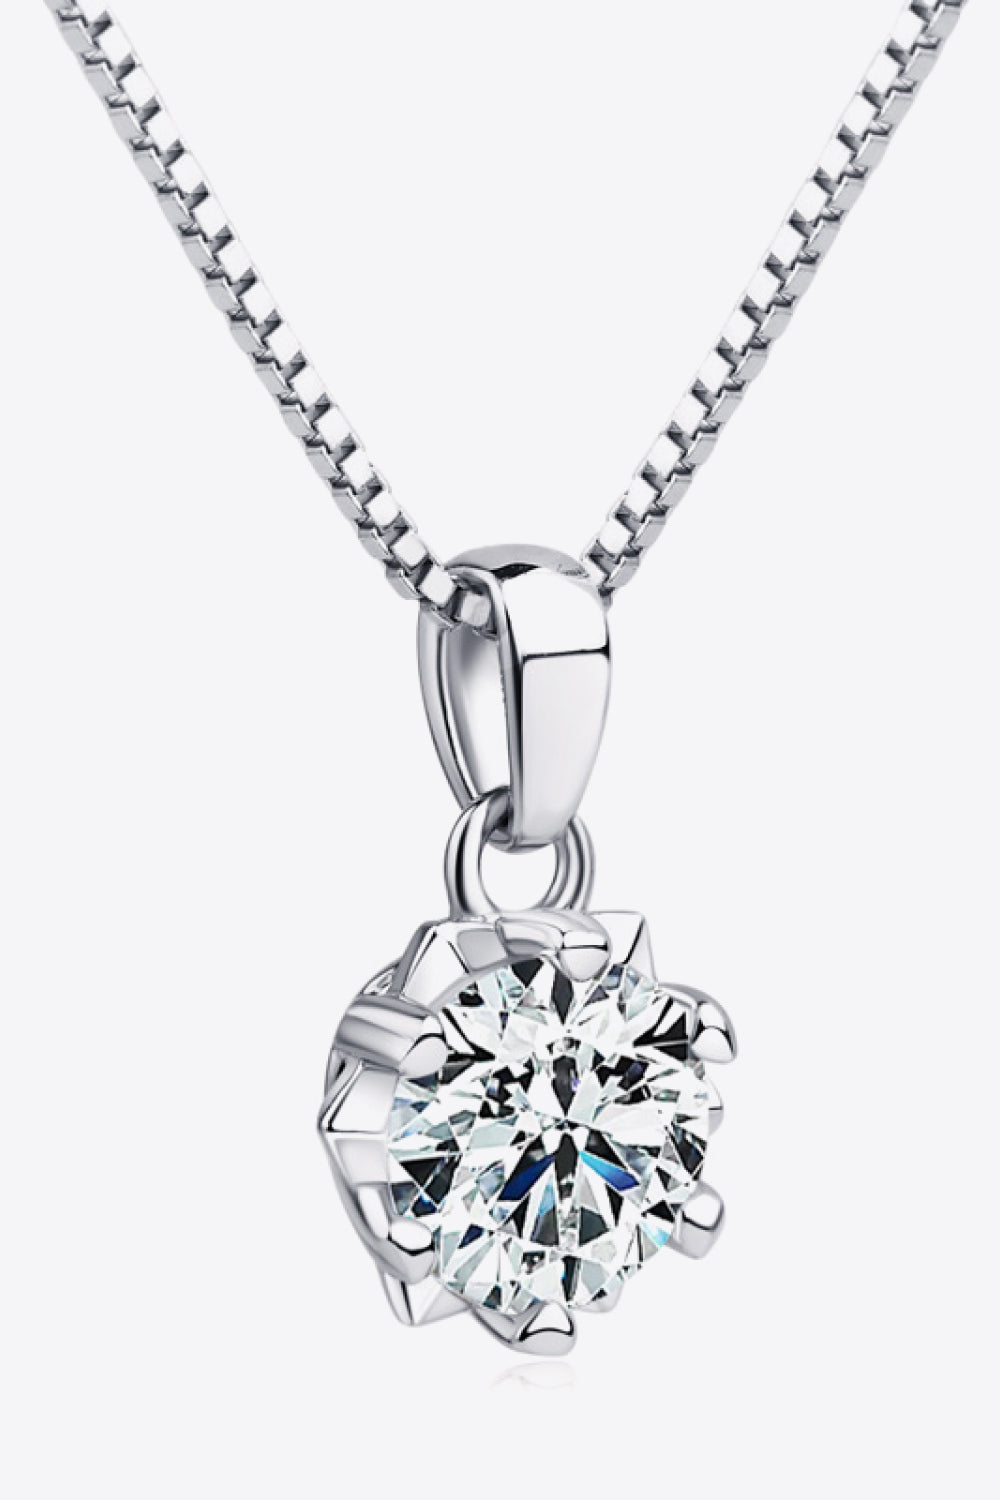 1 Carat Moissanite Pendant Platinum-Plated Necklace Print on any thing USA/STOD clothes